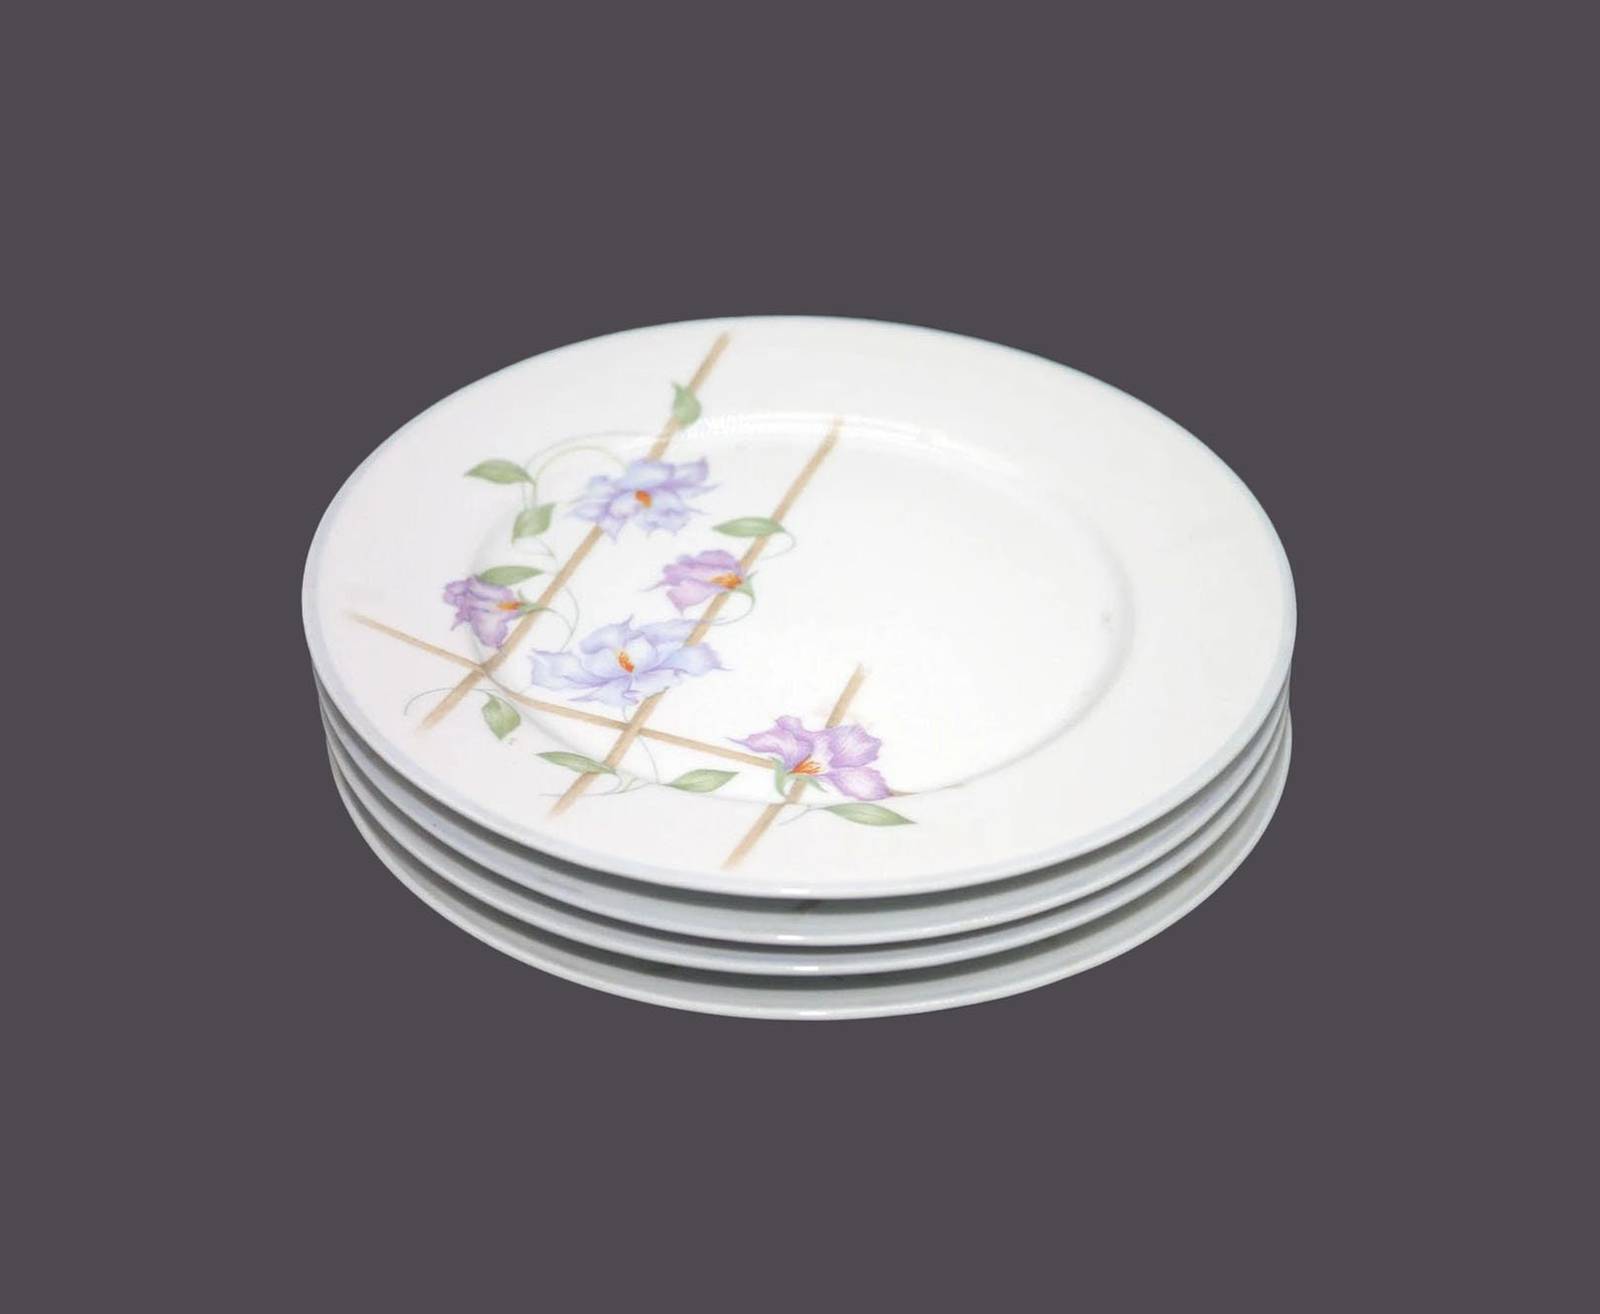 Six Denby Harmony salad plates. Pastel Collection porcelain made in Portugal. - $112.60